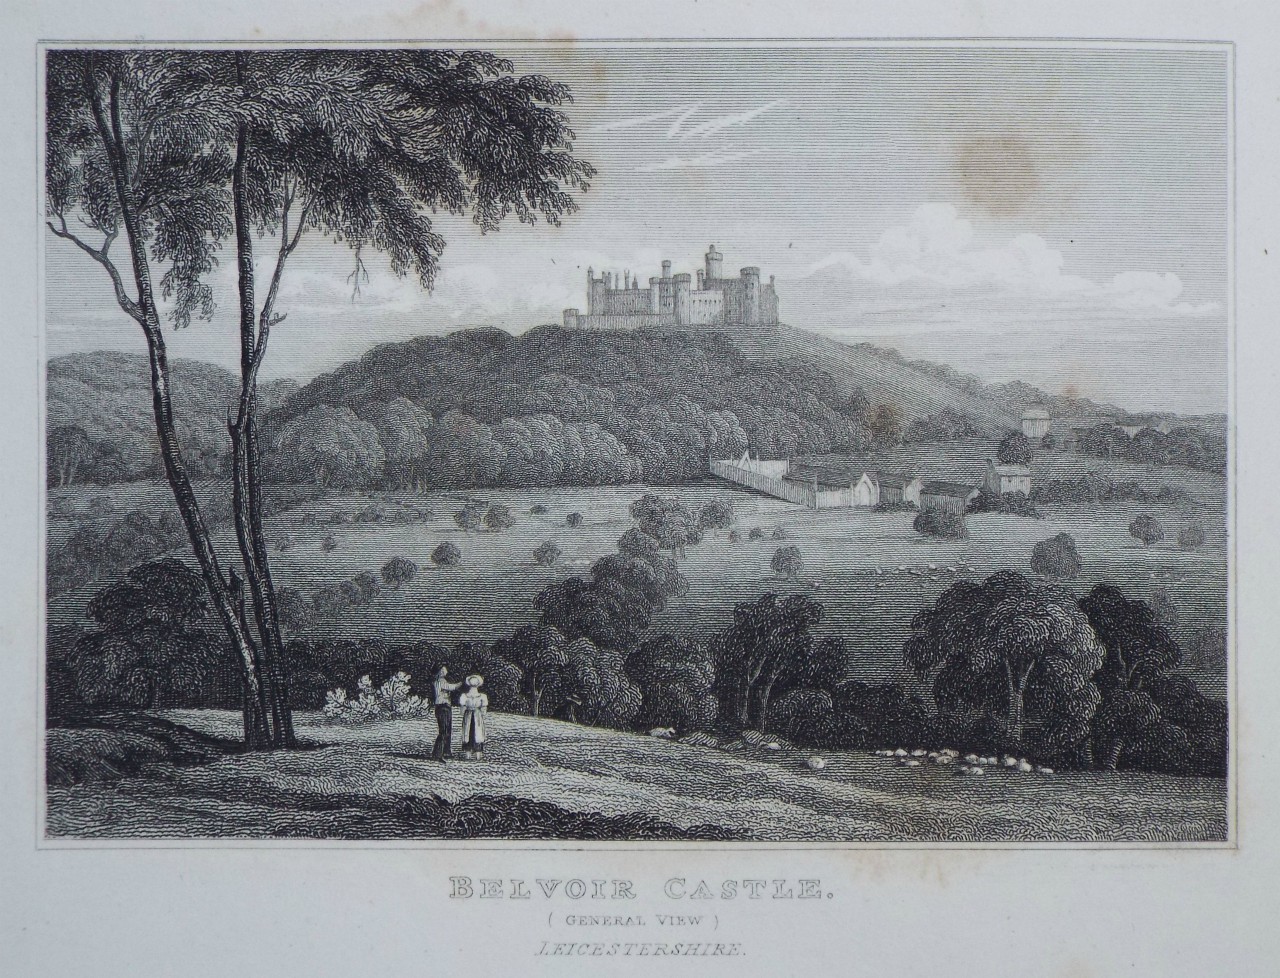 Print - Belvoir Castle, (General View) Leicestershire. The Seat of the Duke of Rutland. - 